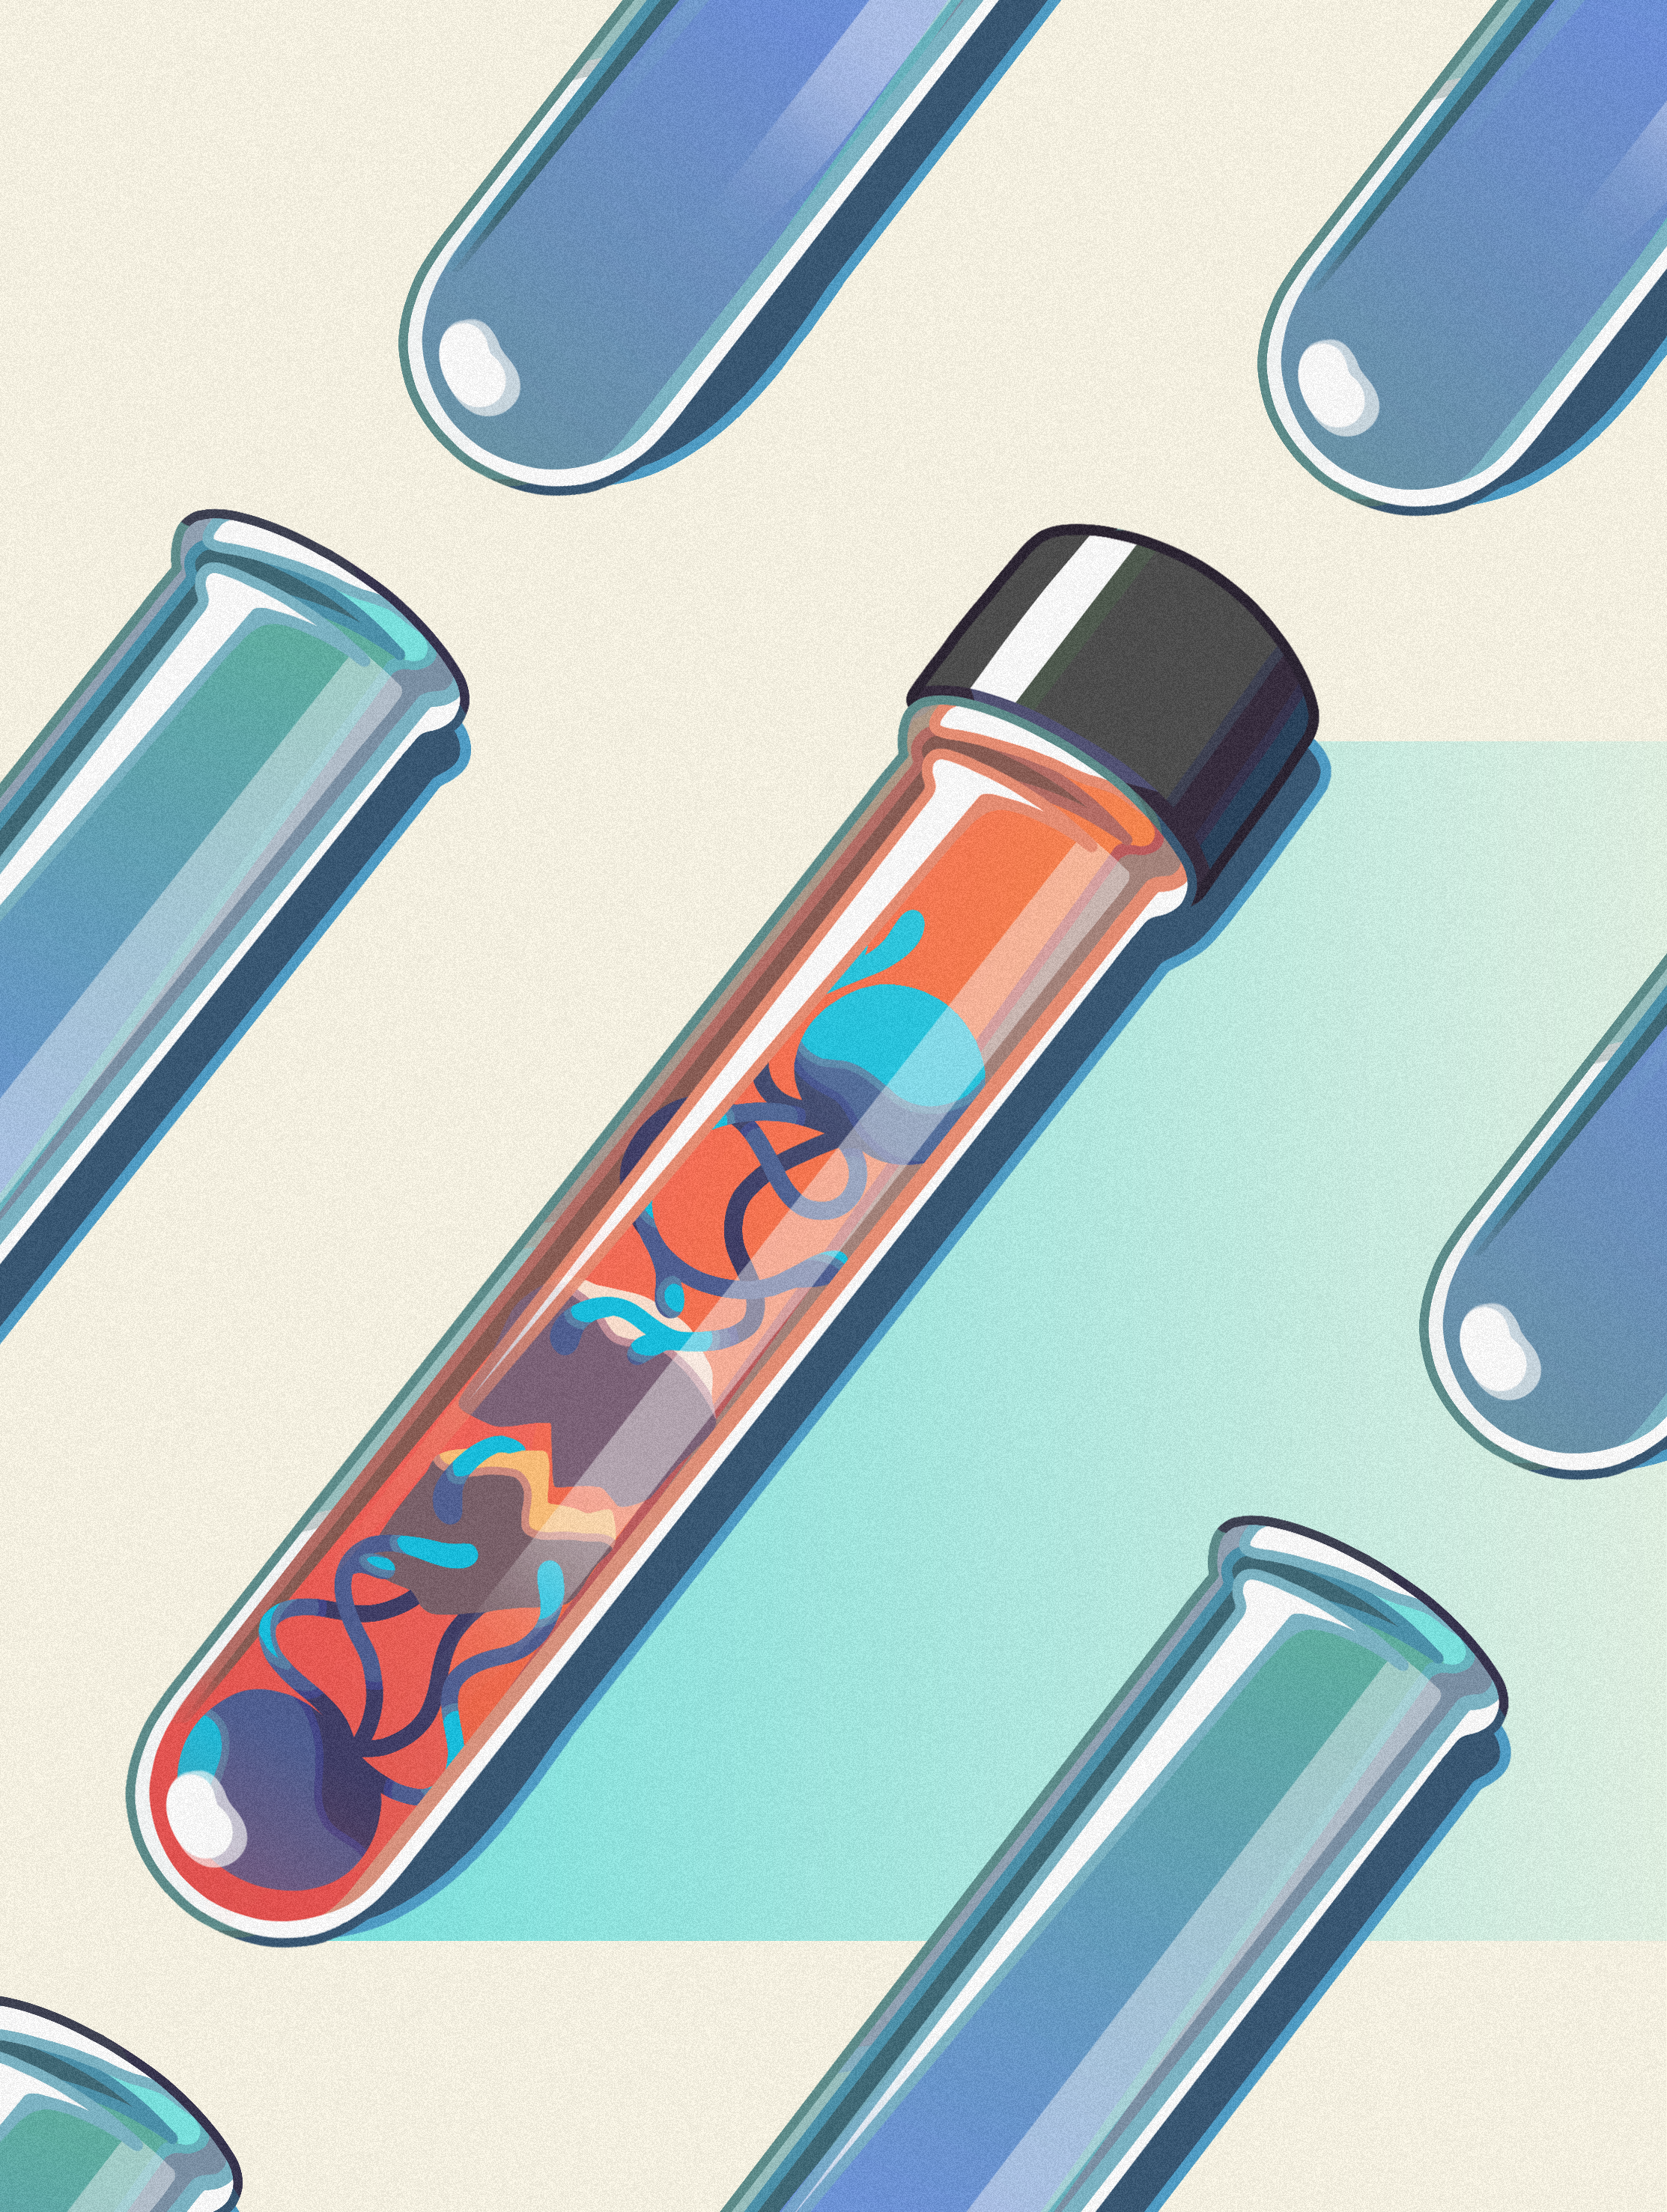 A vial filled with colorful shapes representing molecules and enzymes sits on a beige surface surrounded by empty blue vials